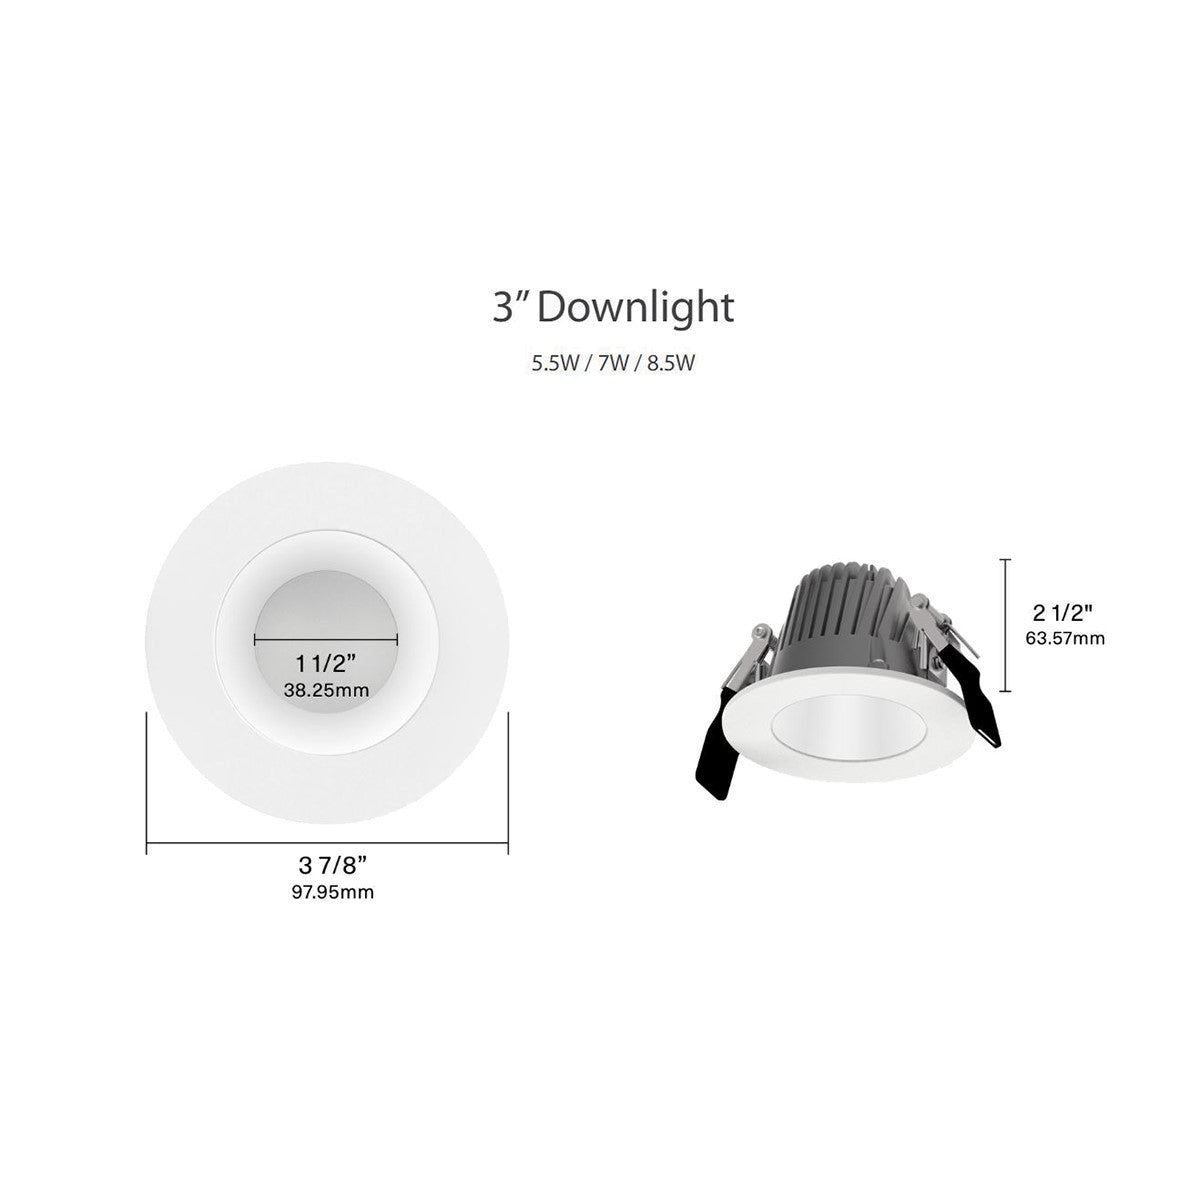 3 Inch LED Deep Regress Commercial Downlight, Field Adjustable 5.5/7.8/8.5W, 380/500/600 Lumens, 30/35/40/50K, Smooth Trim, Matte Silver Finish